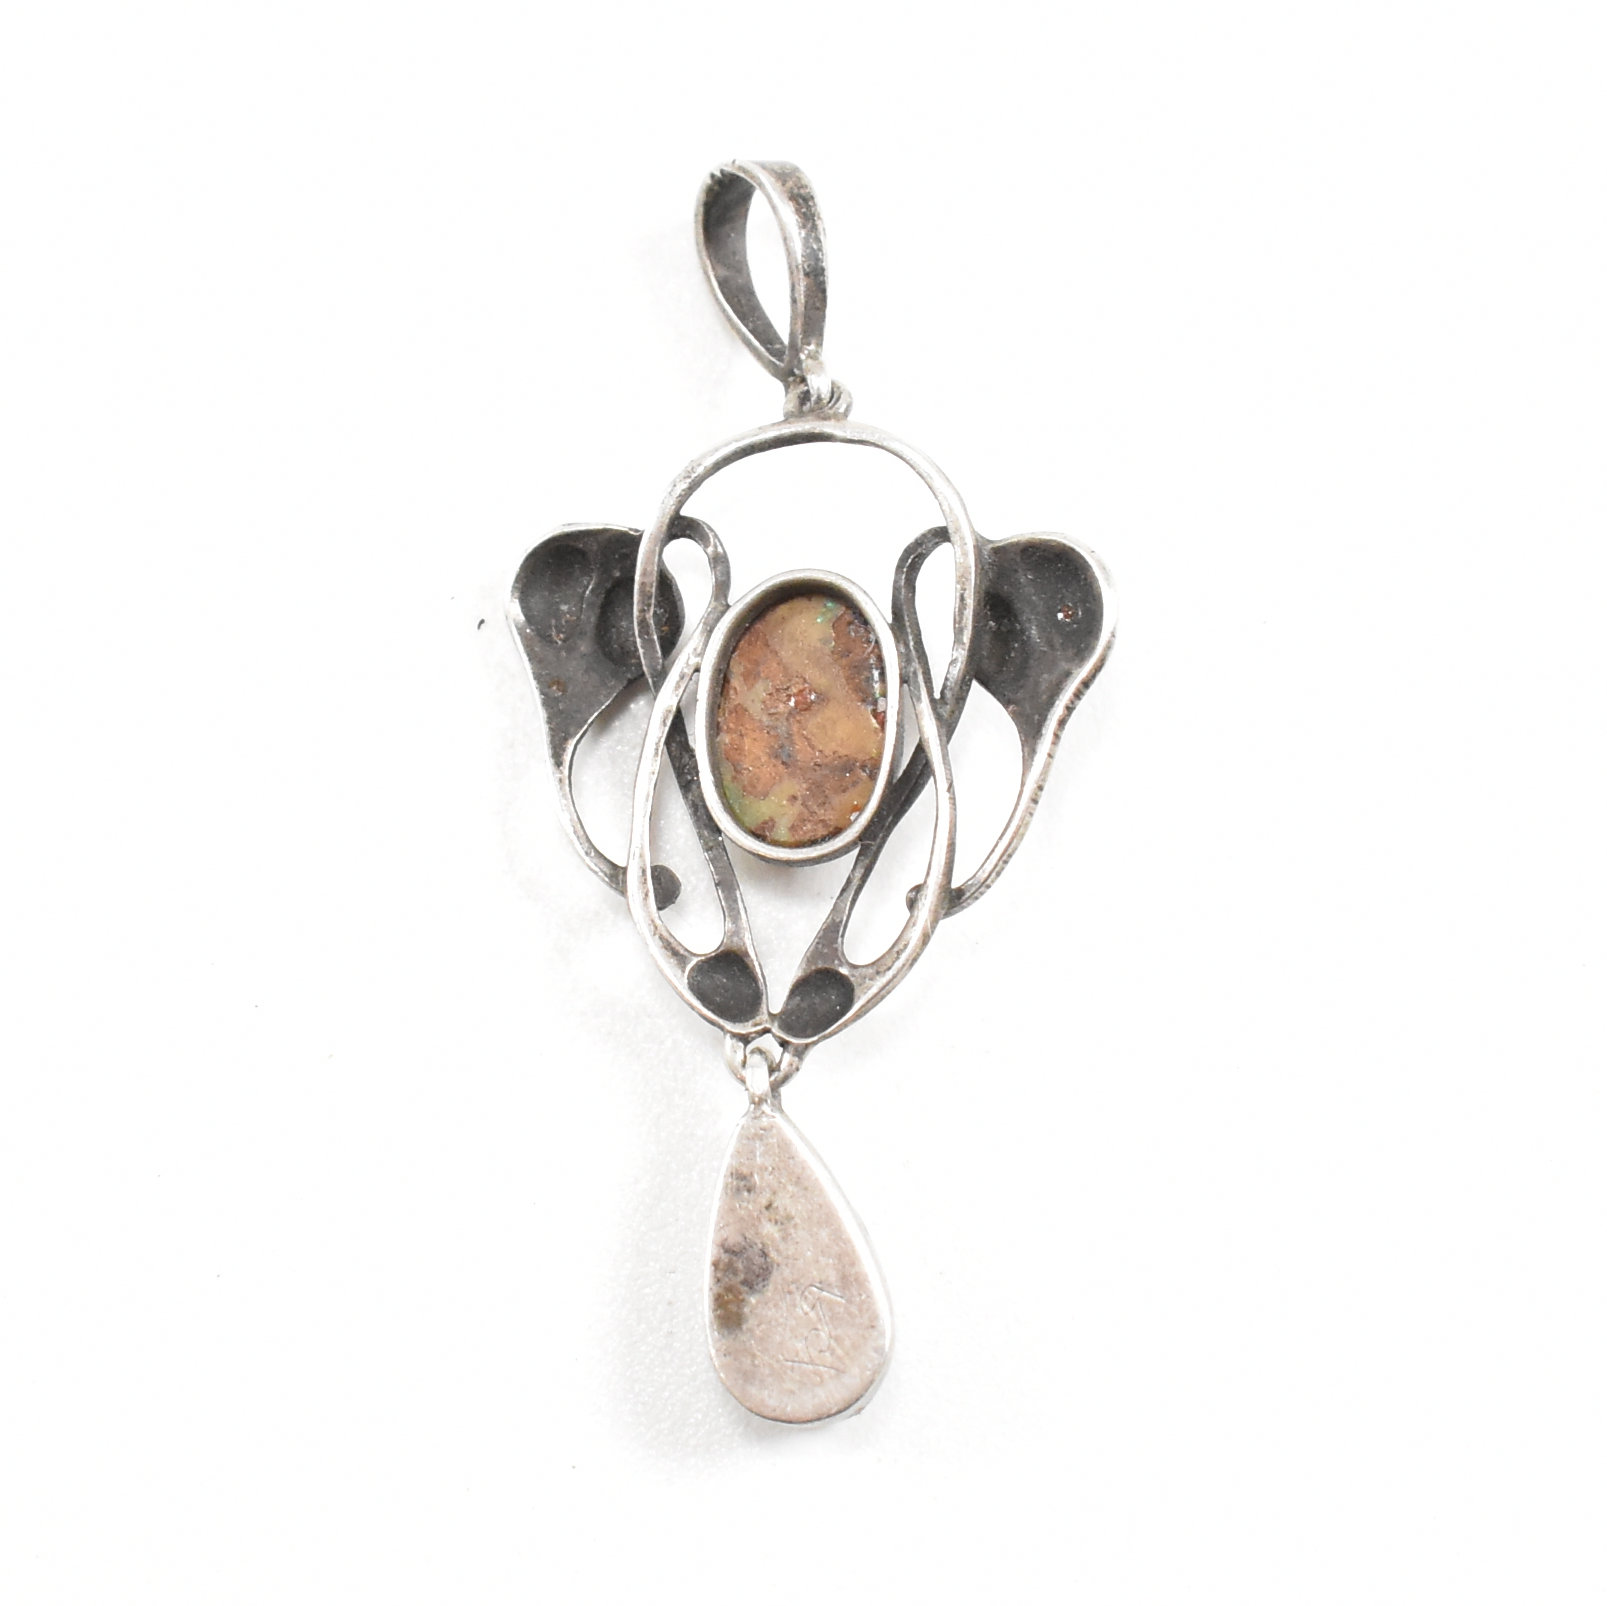 ARTS & CRAFTS SILVER OPAL & MOTHER OF PEARL NECKLACE PENDANT - Image 3 of 6